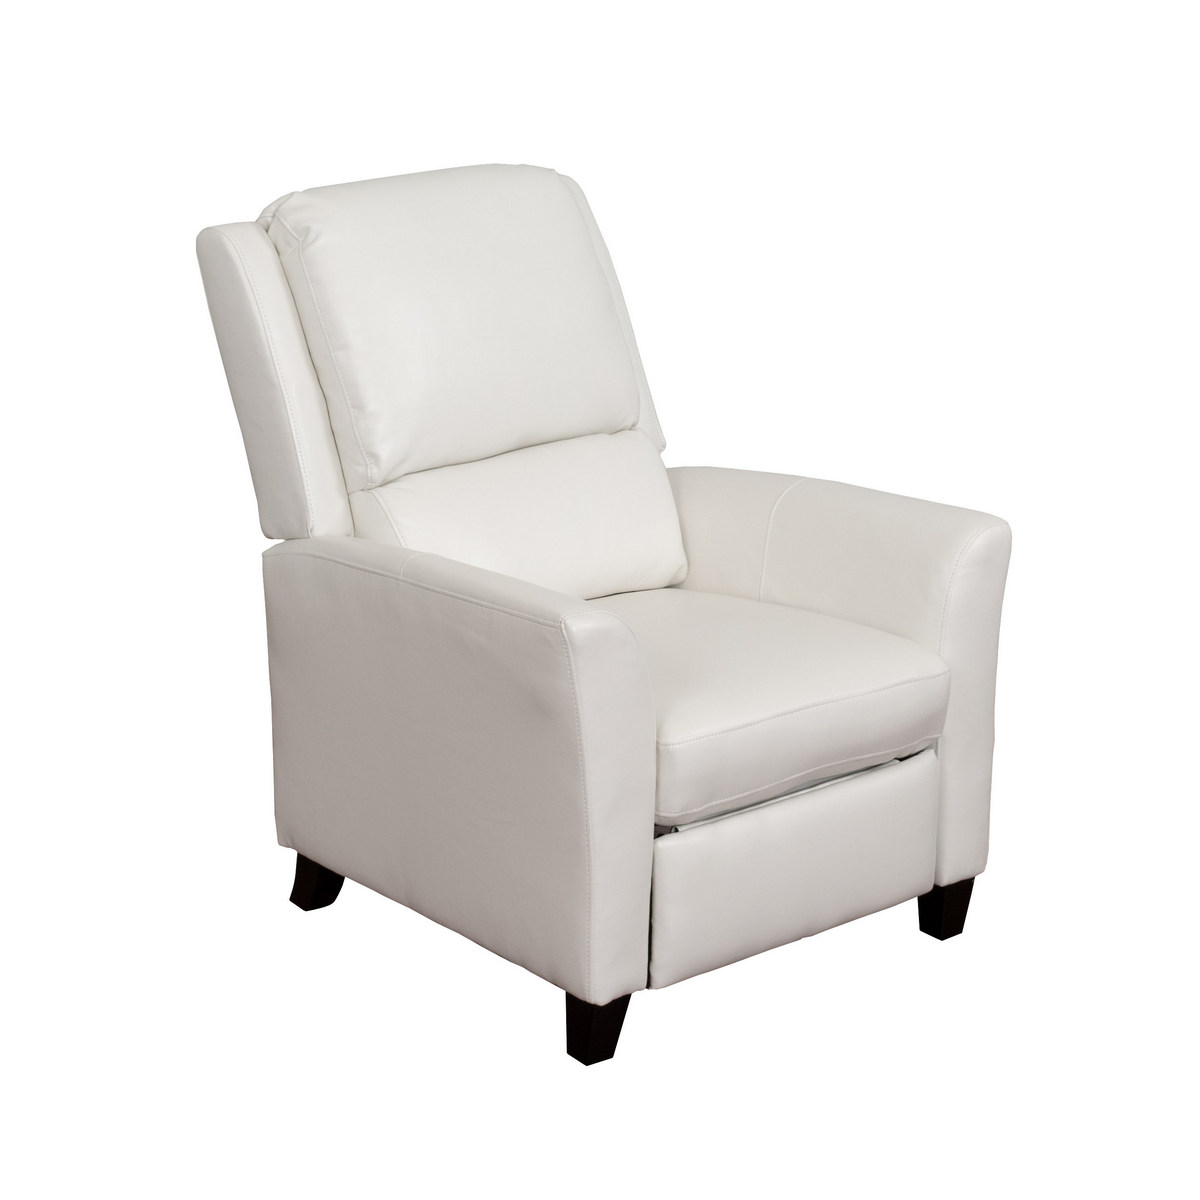 CorLiving LZY-513-R Kate White Bonded Leather Recliner - Recliners